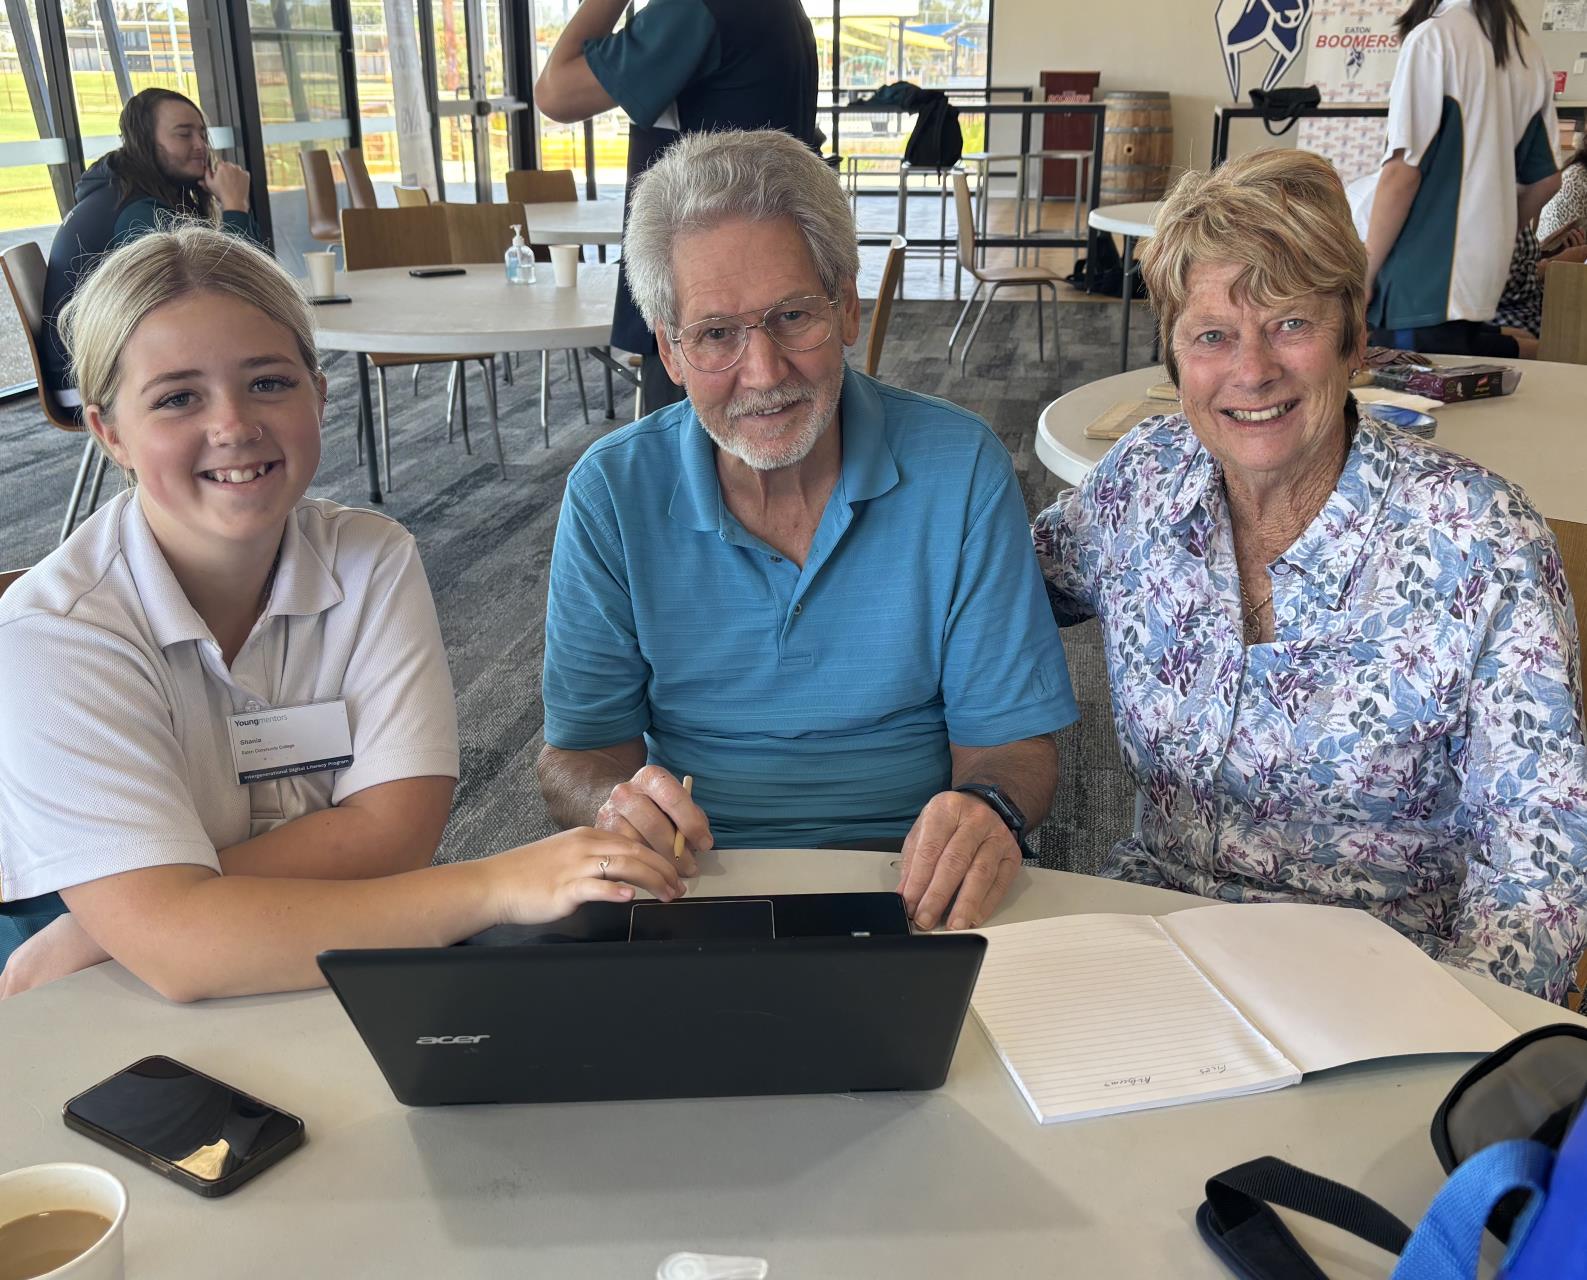 The Shire of Dardanup’s Digital Connection Program participants (from left) Eaton Community College Student Shania Curtin with John Owen-Tuckerson and Sherron Spragg.